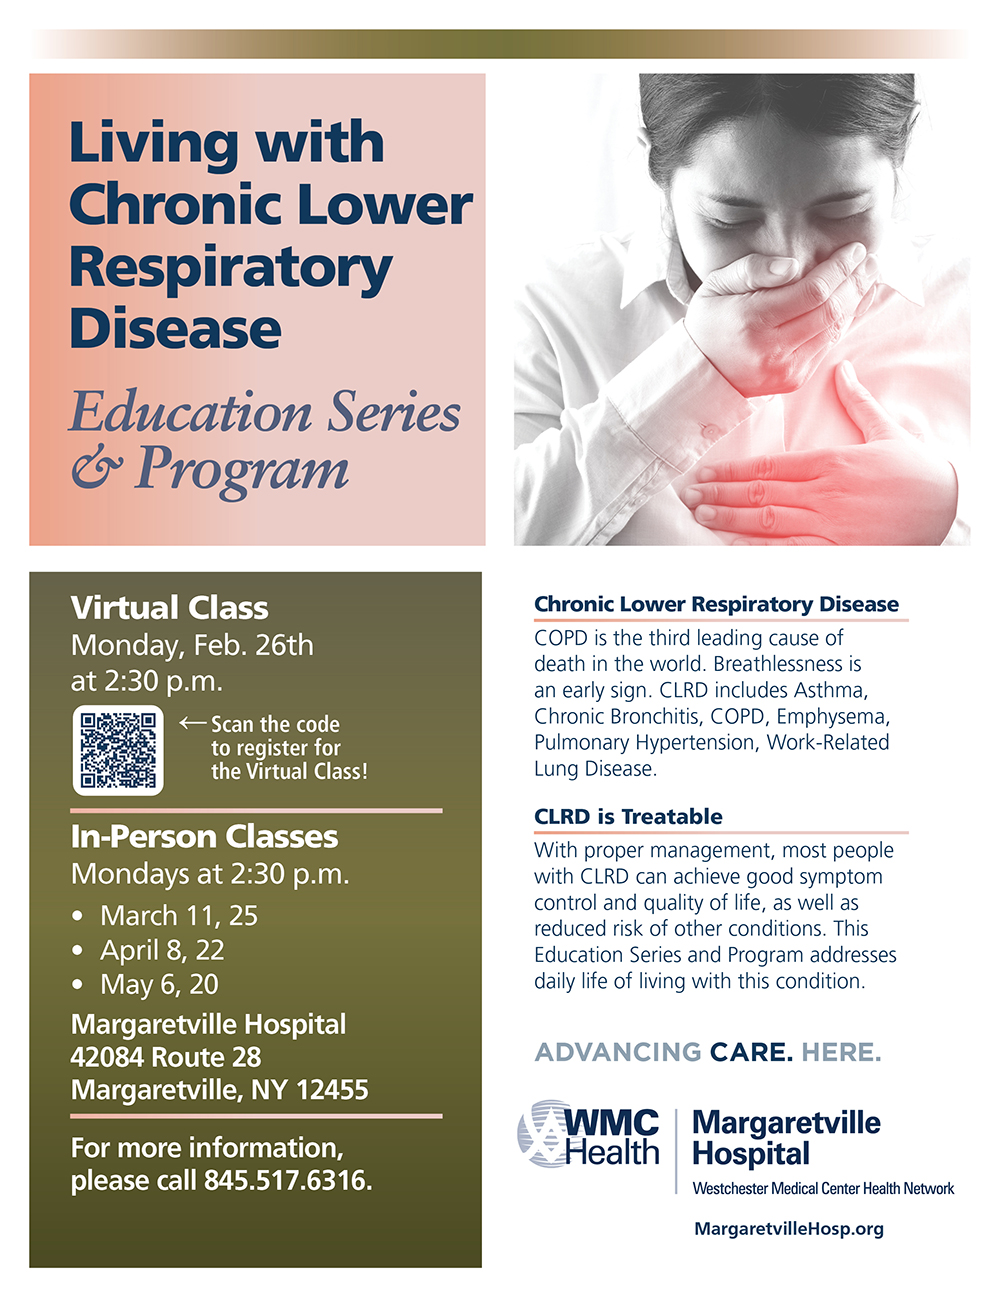 Living with Chronic Lower Respiratory Disease